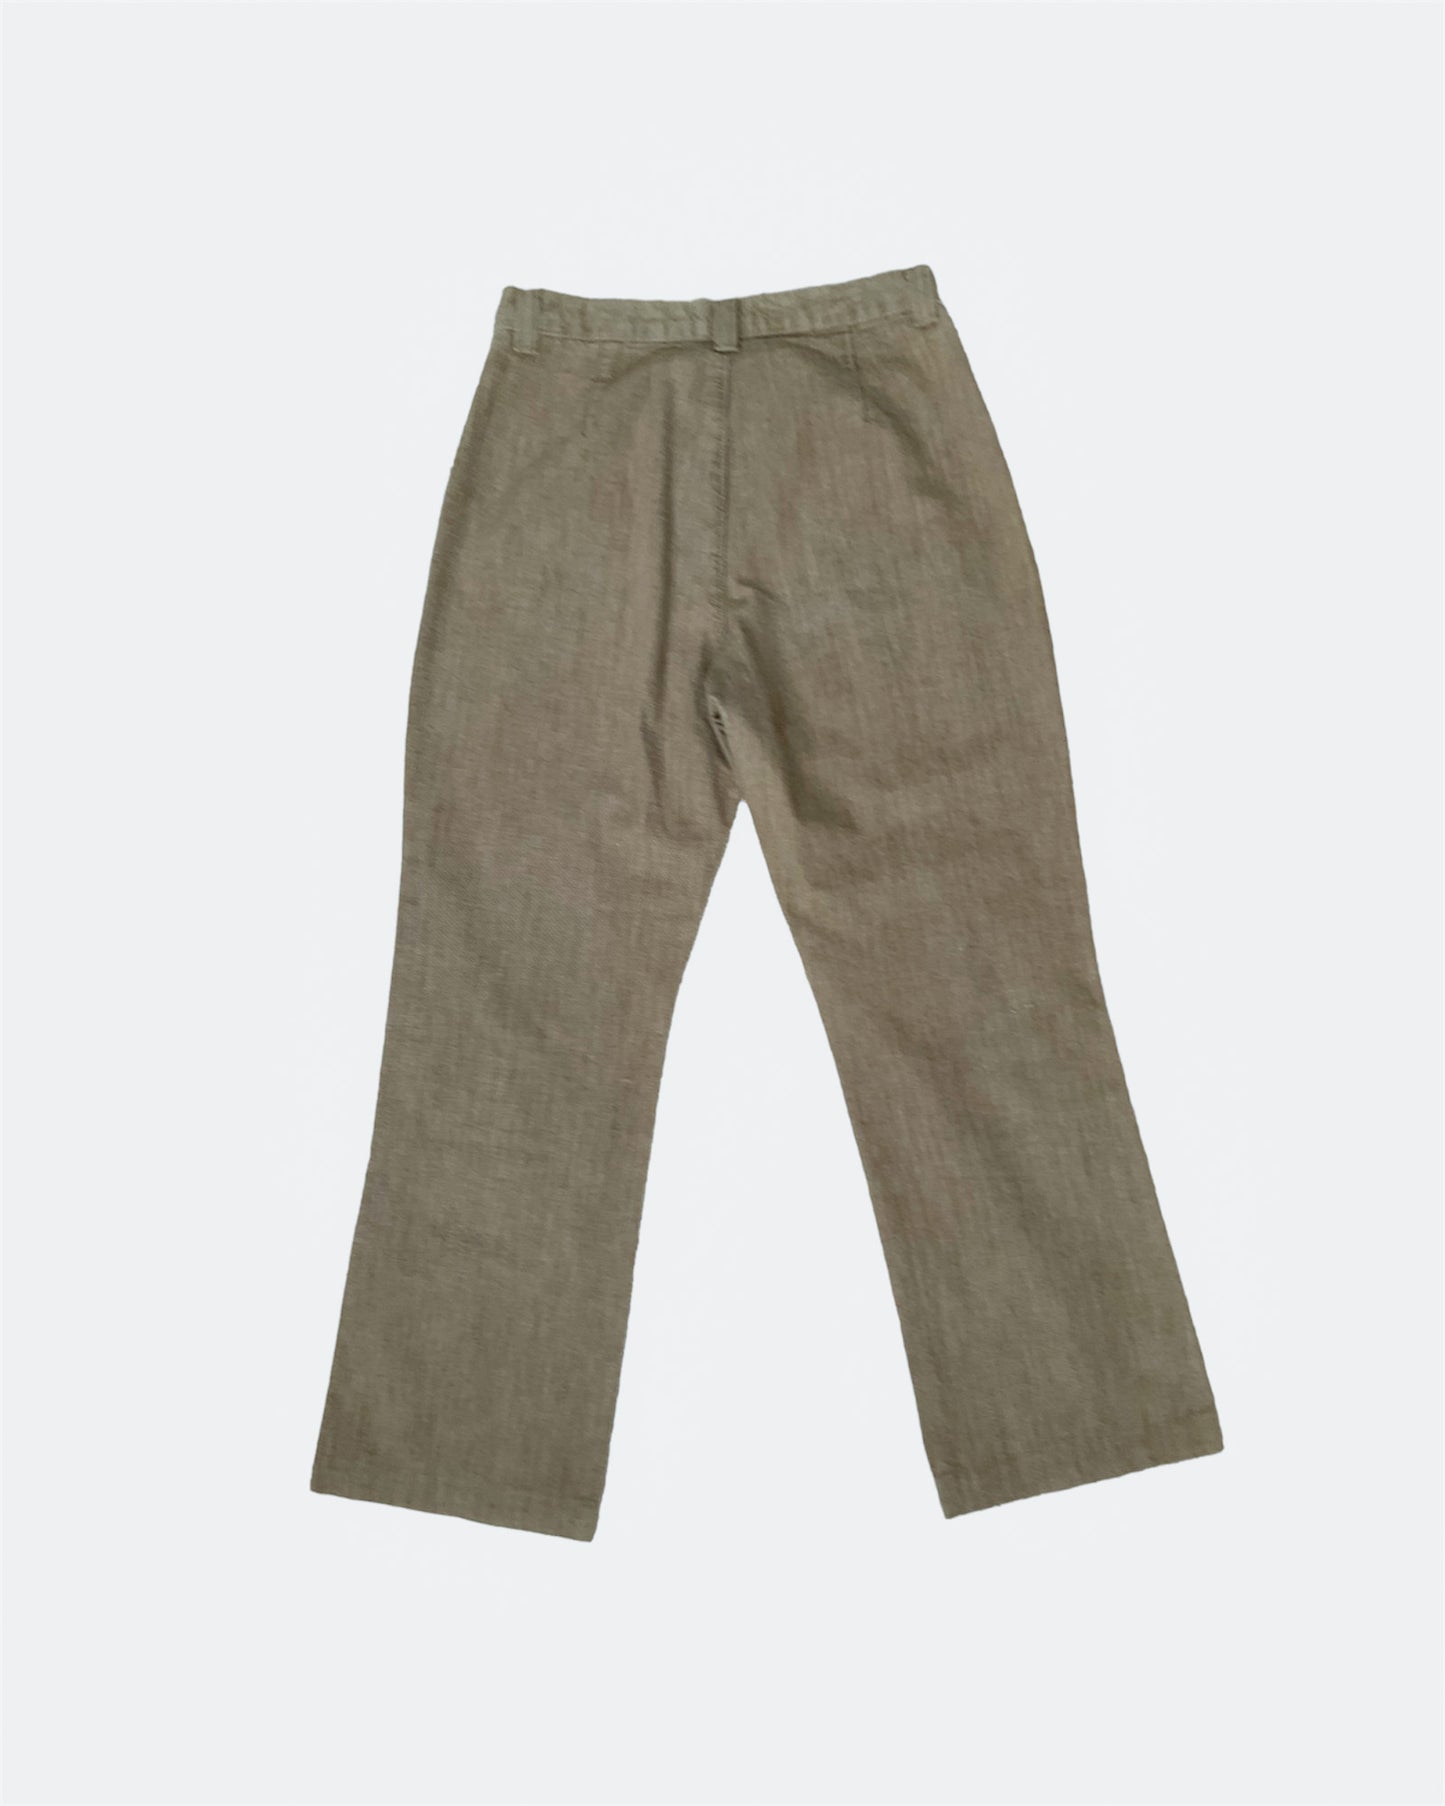 Riveted by LEE Pocket Trousers